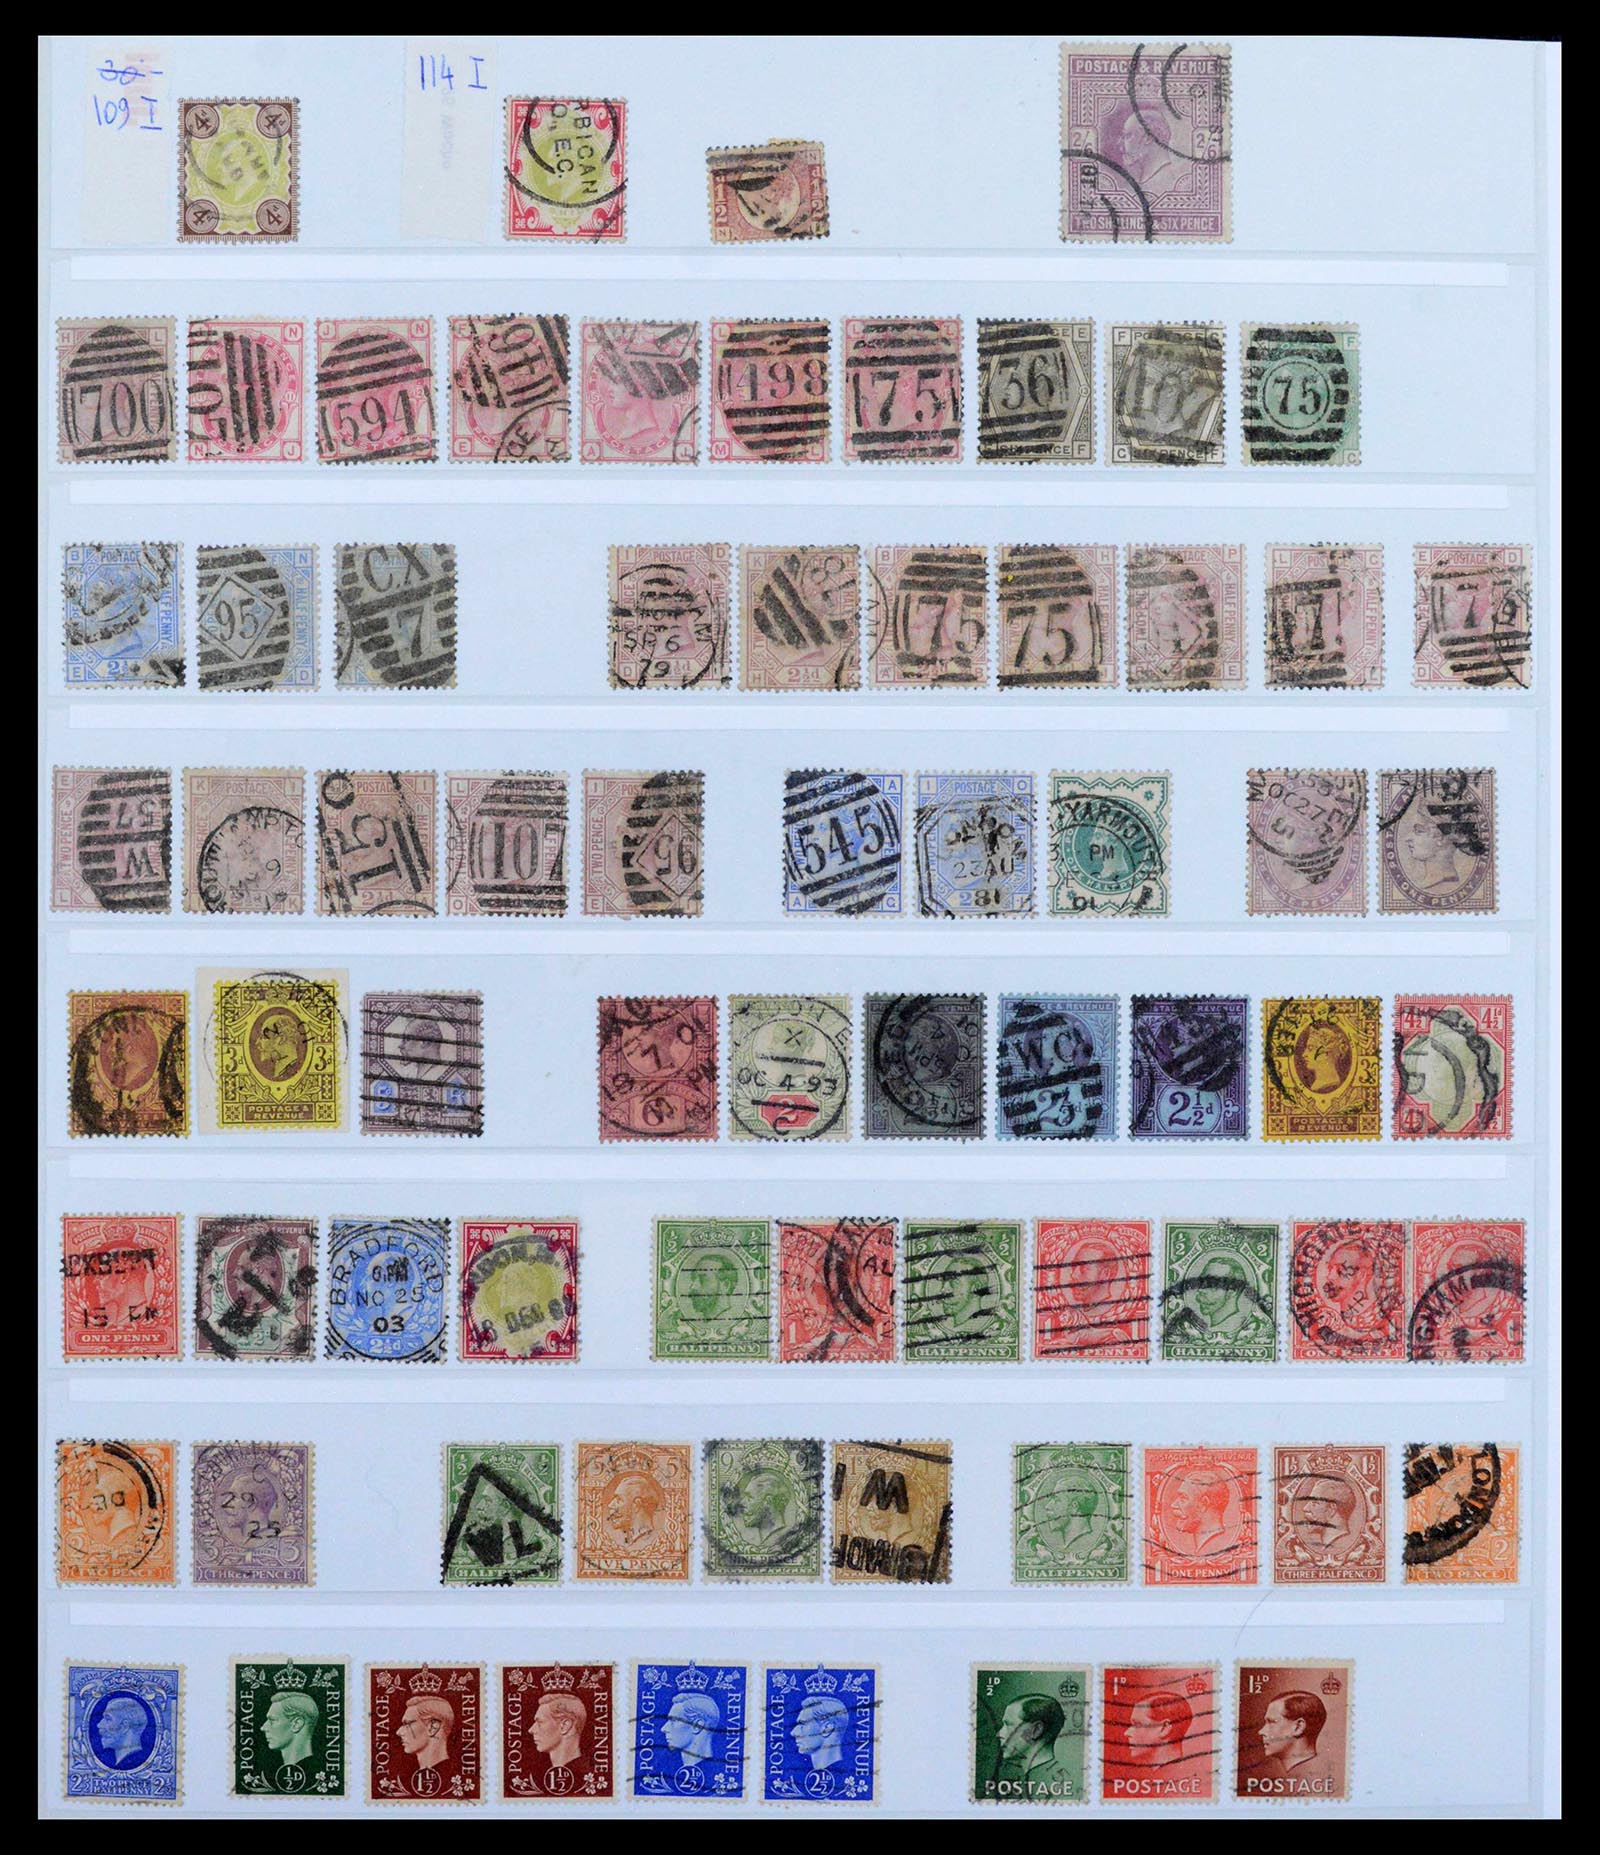 39375 0051 - Stamp collection 39375 Great Britain super collection 1840-1980.